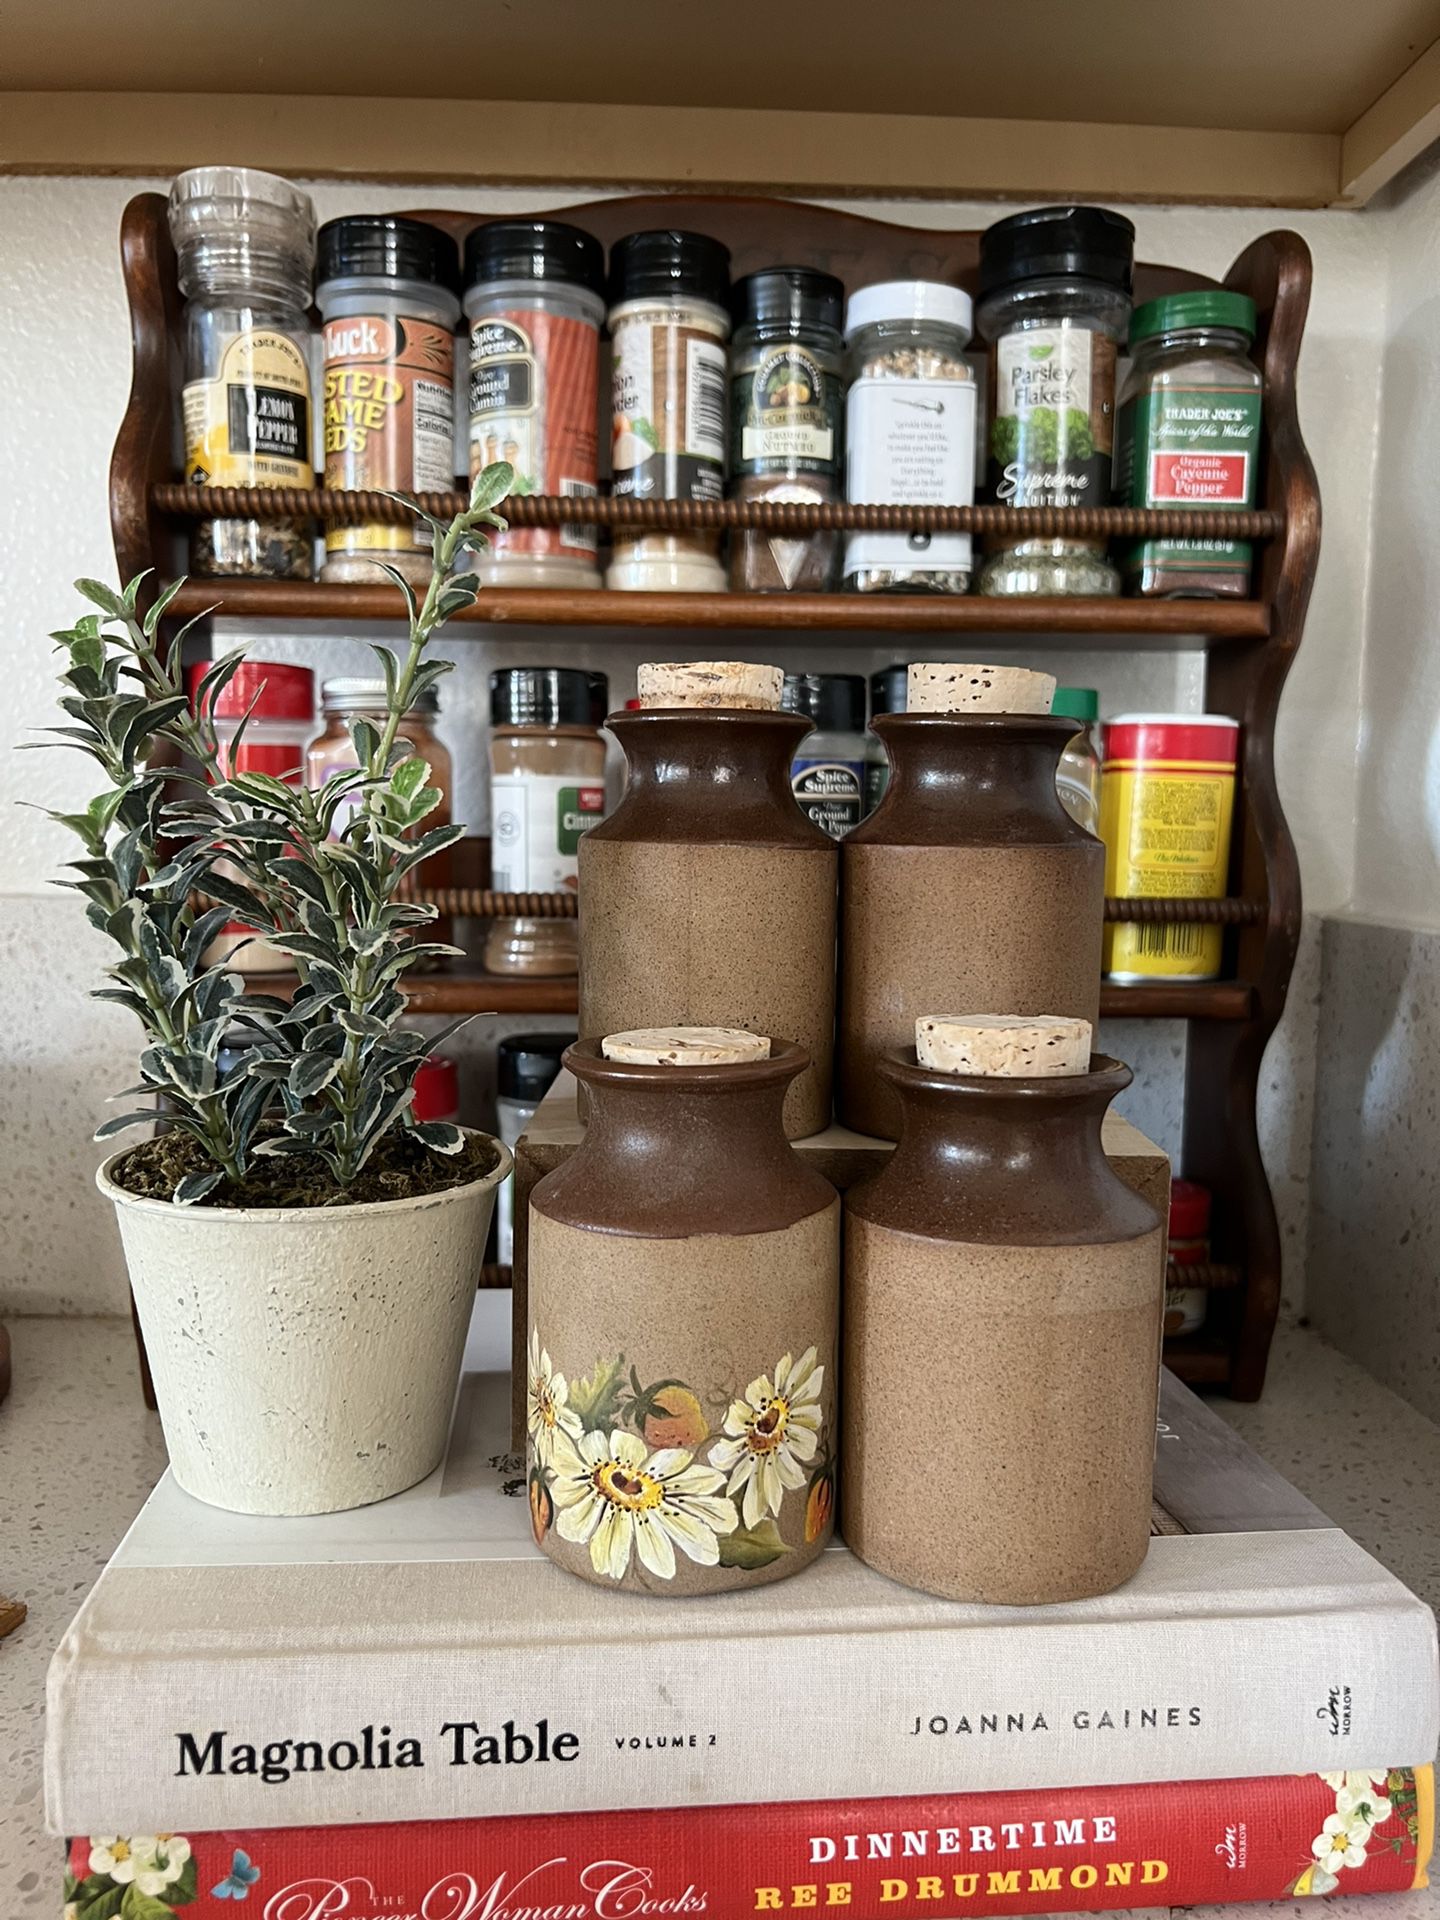 Spice Jars With Outboard Wood Spoons – Fixtures Close Up